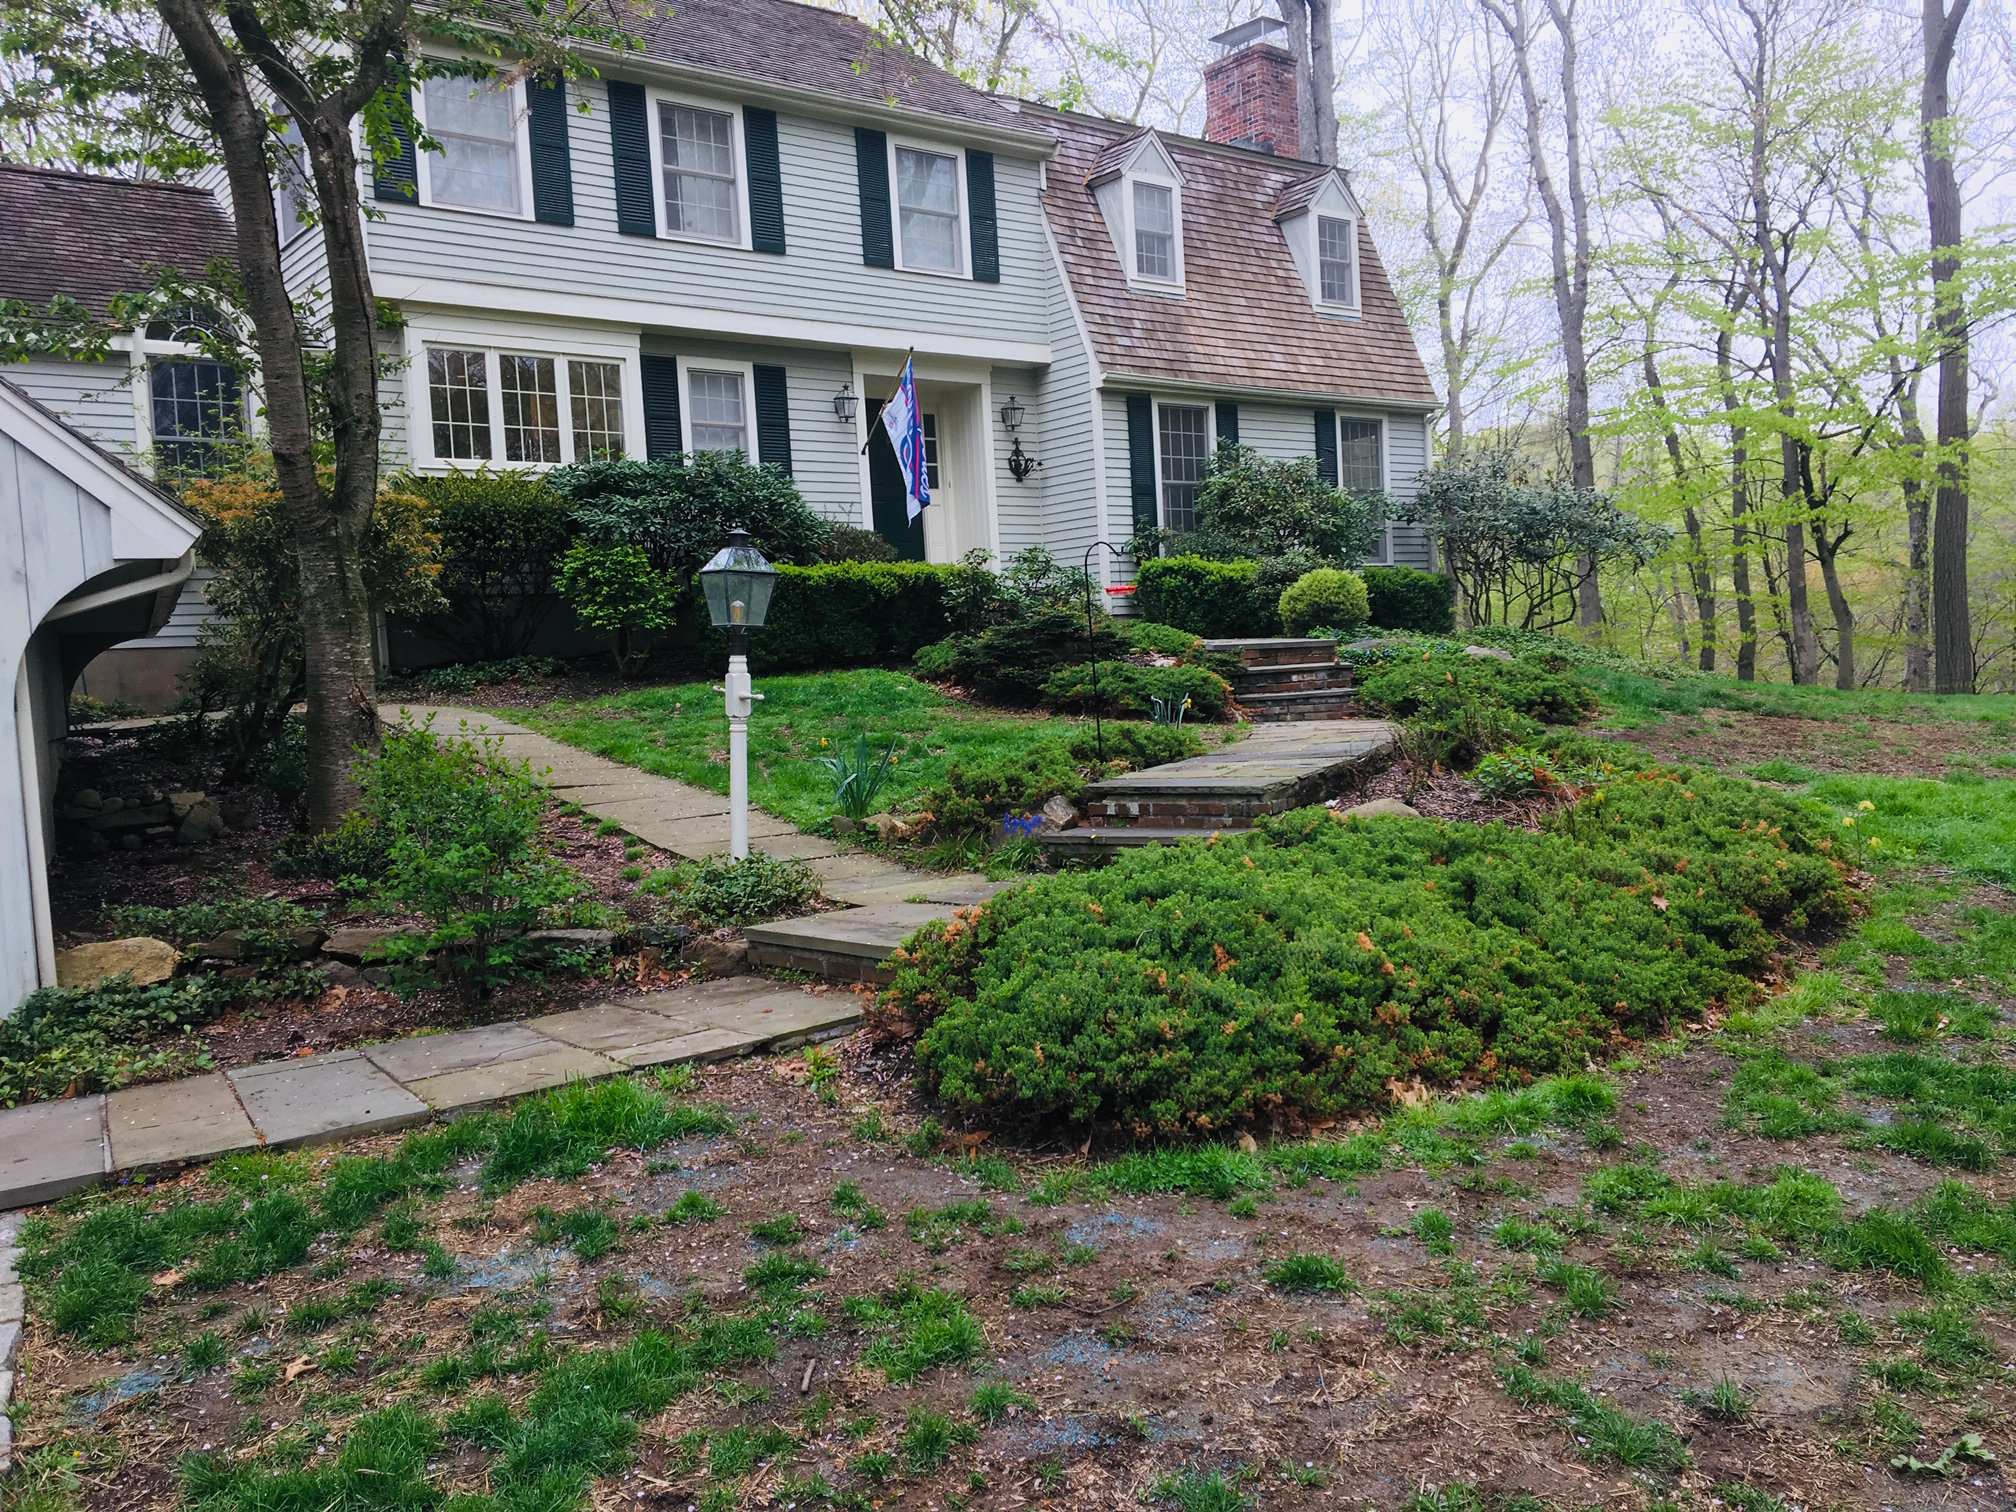 Client requested we replaced old falling apart front door walkway with a new flagstone and tread walkway at 4 feet wide. The risers are stacked frield stone to keep the theme country. The path by the